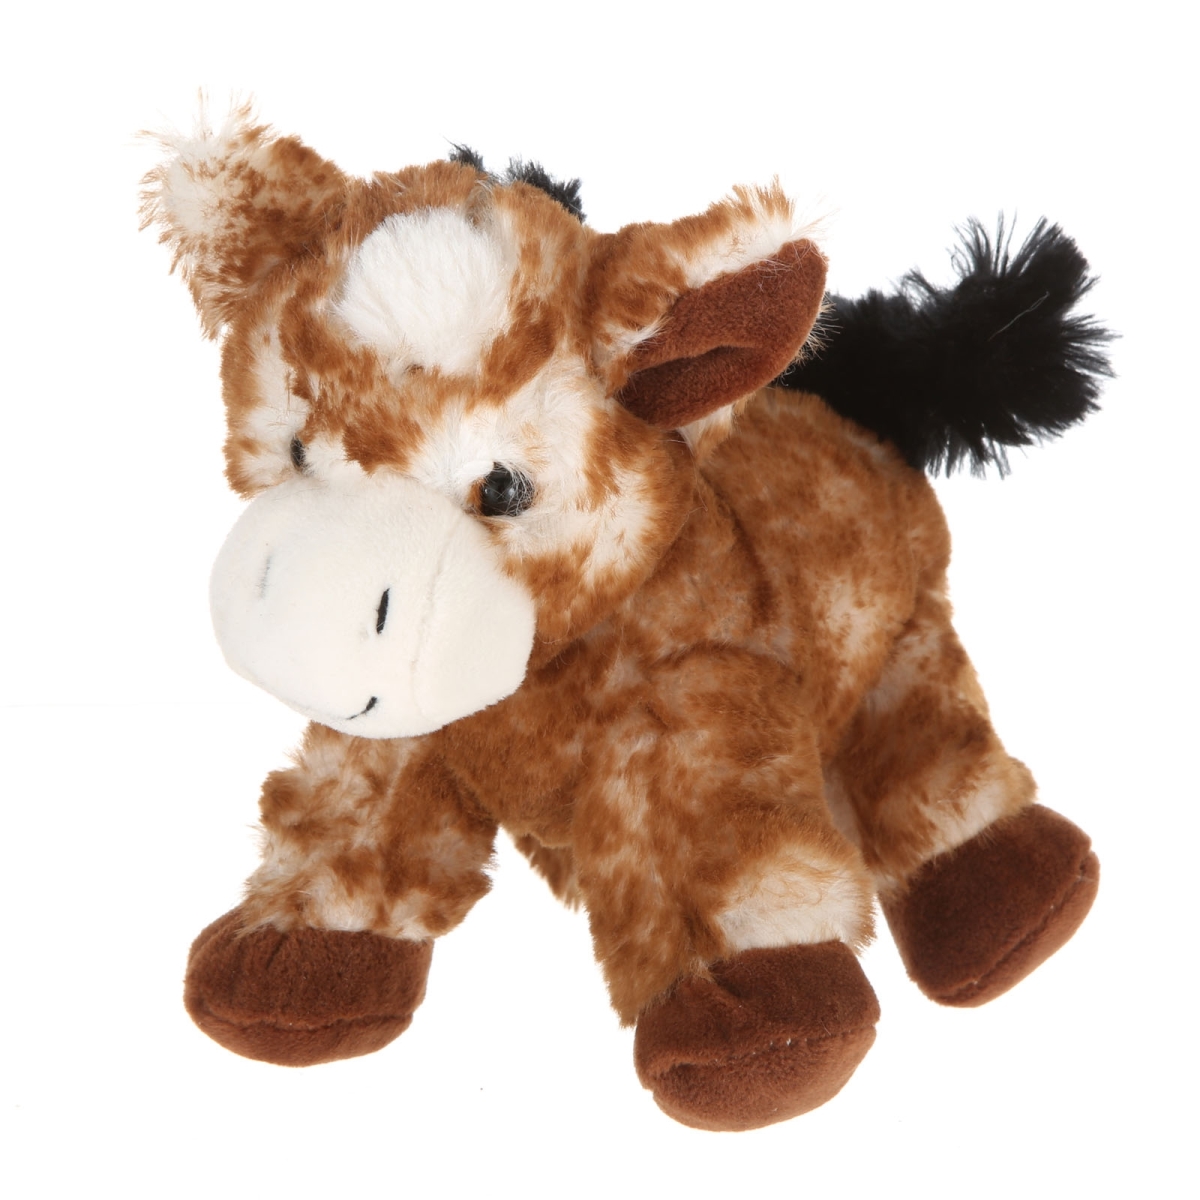 A00047 7 In. Plush Lying Horse - Brown